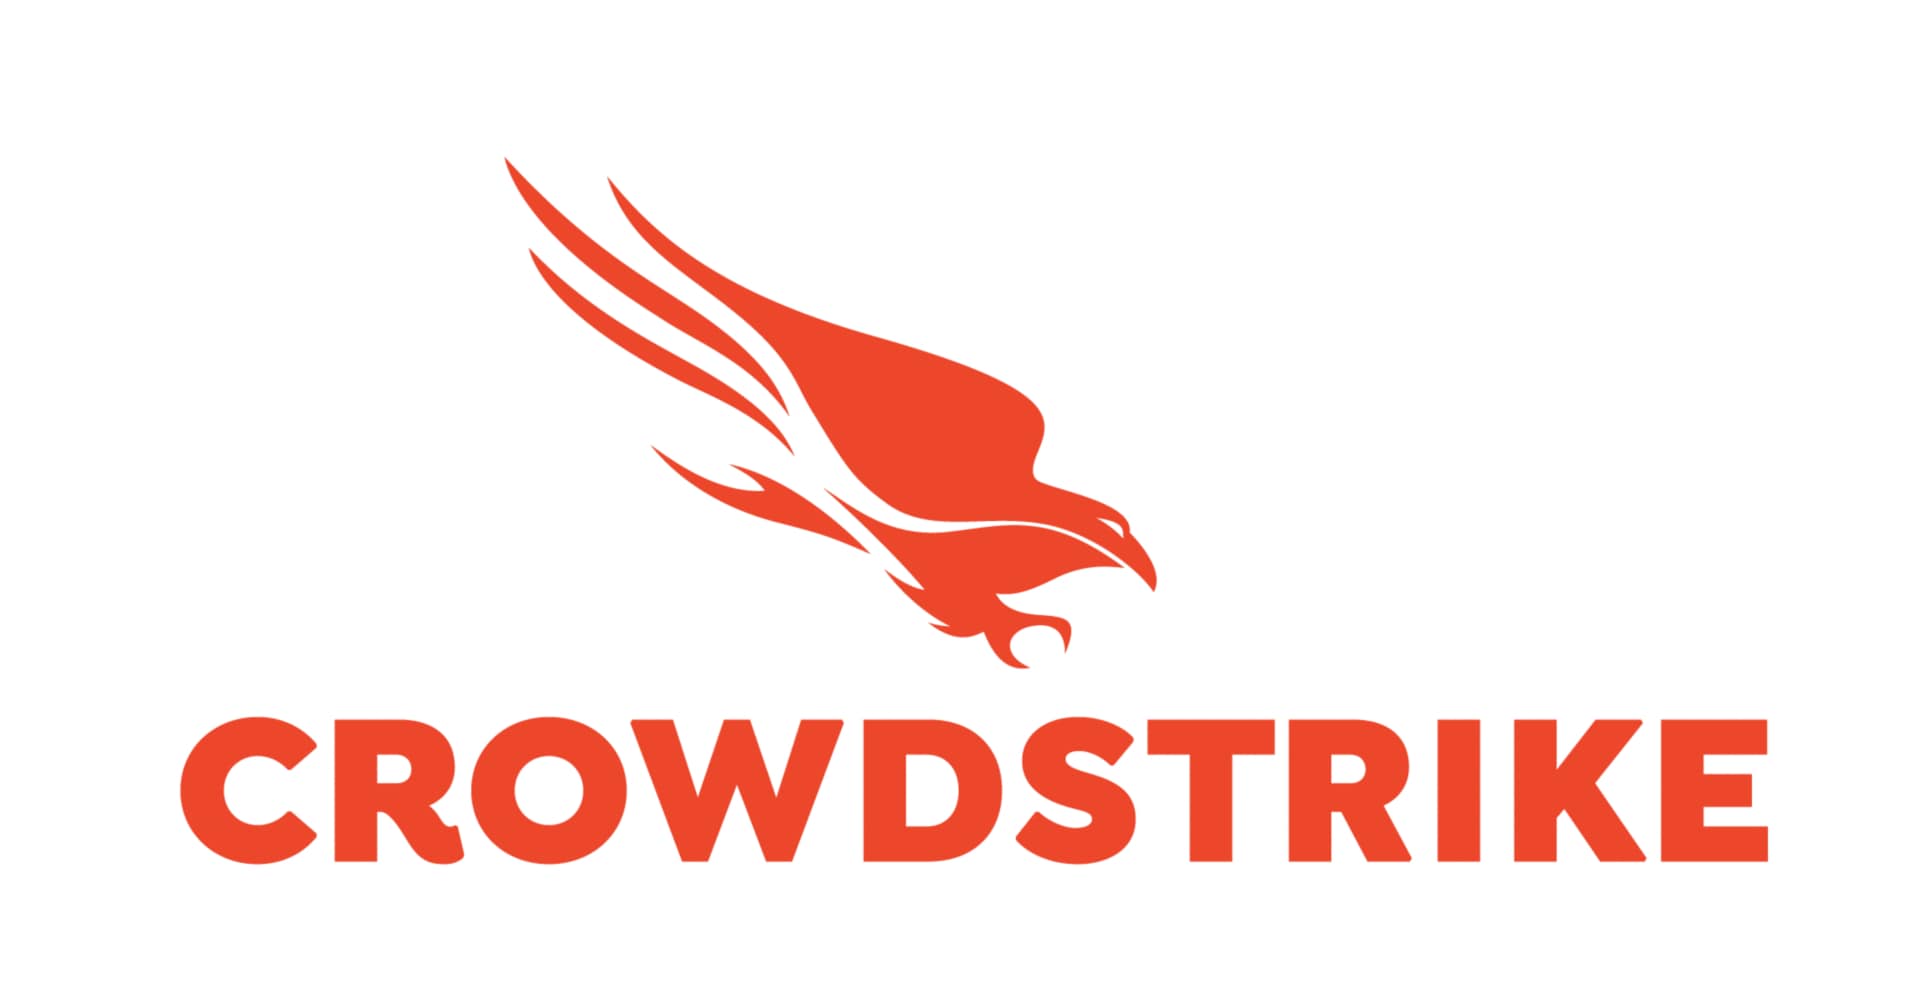 CrowdStrike 12-Month Falcon Intelligence Application Software Subscription